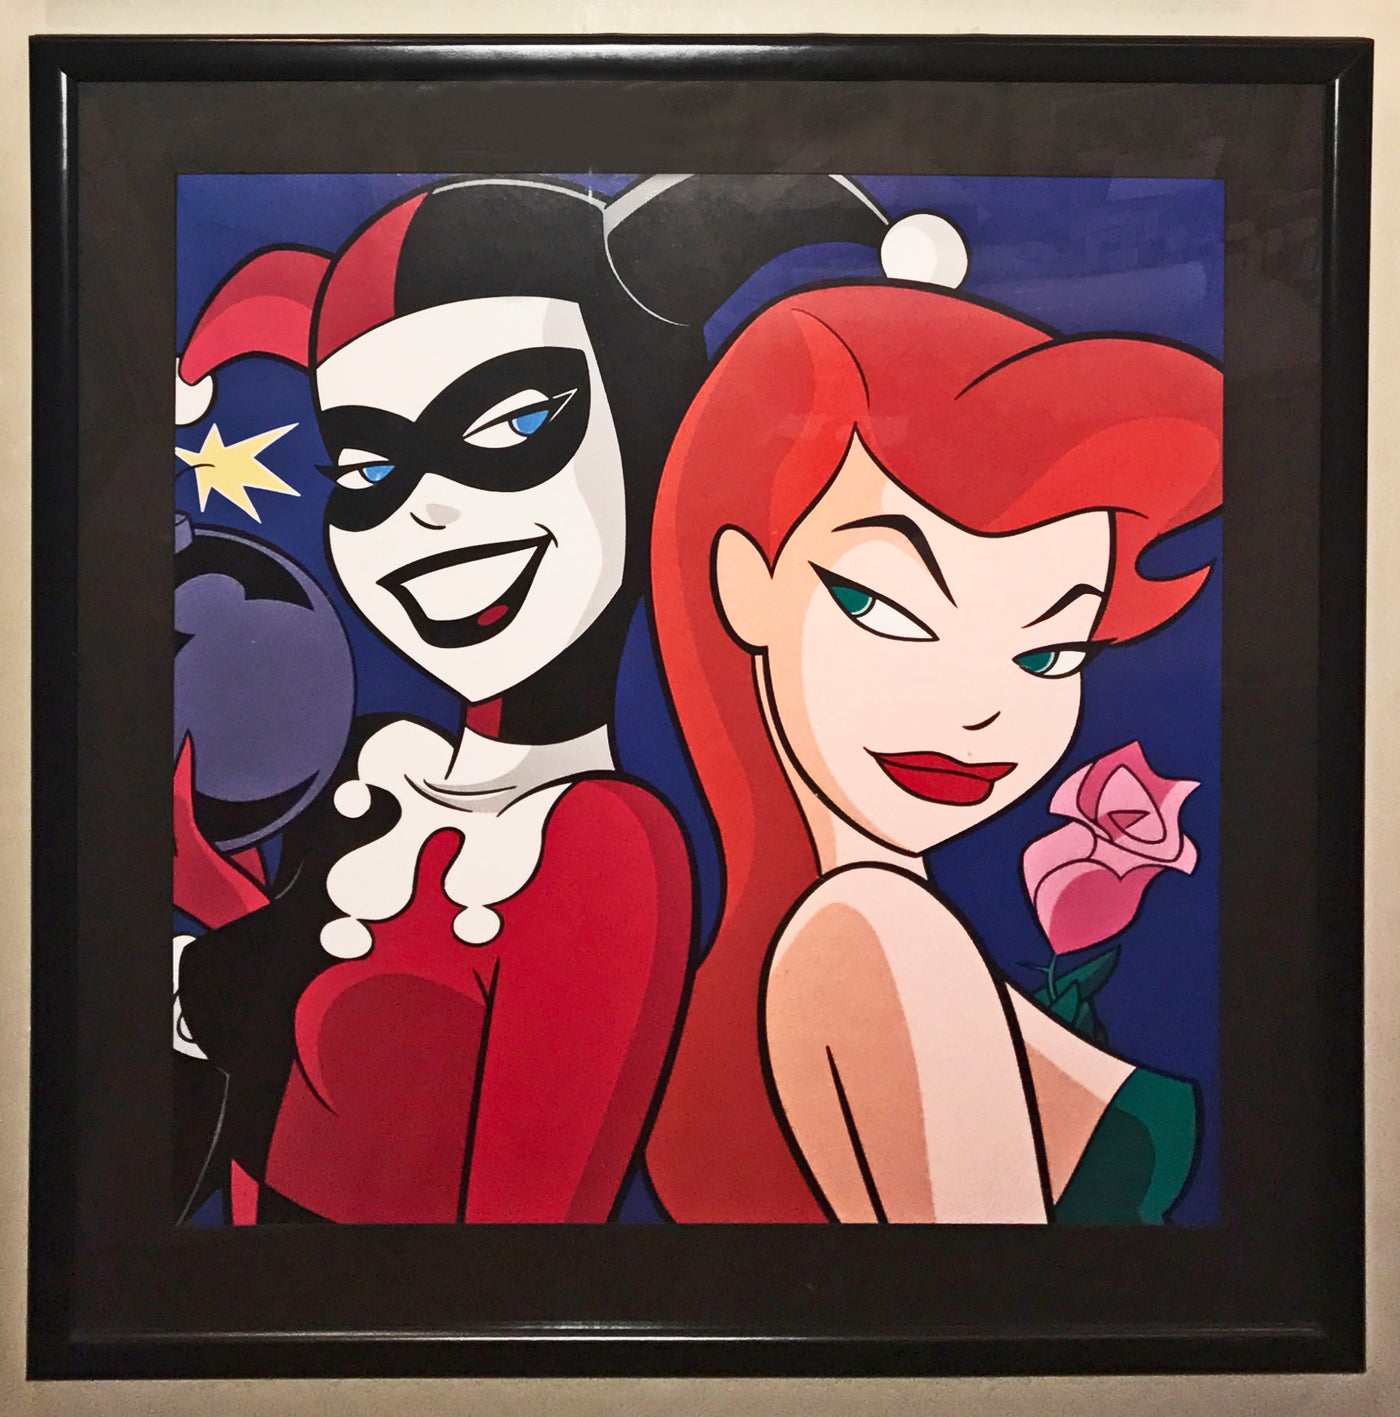 Original Warner Brothers Batman Limited Edition Lithograph, Harley Quinn and Poison Ivy